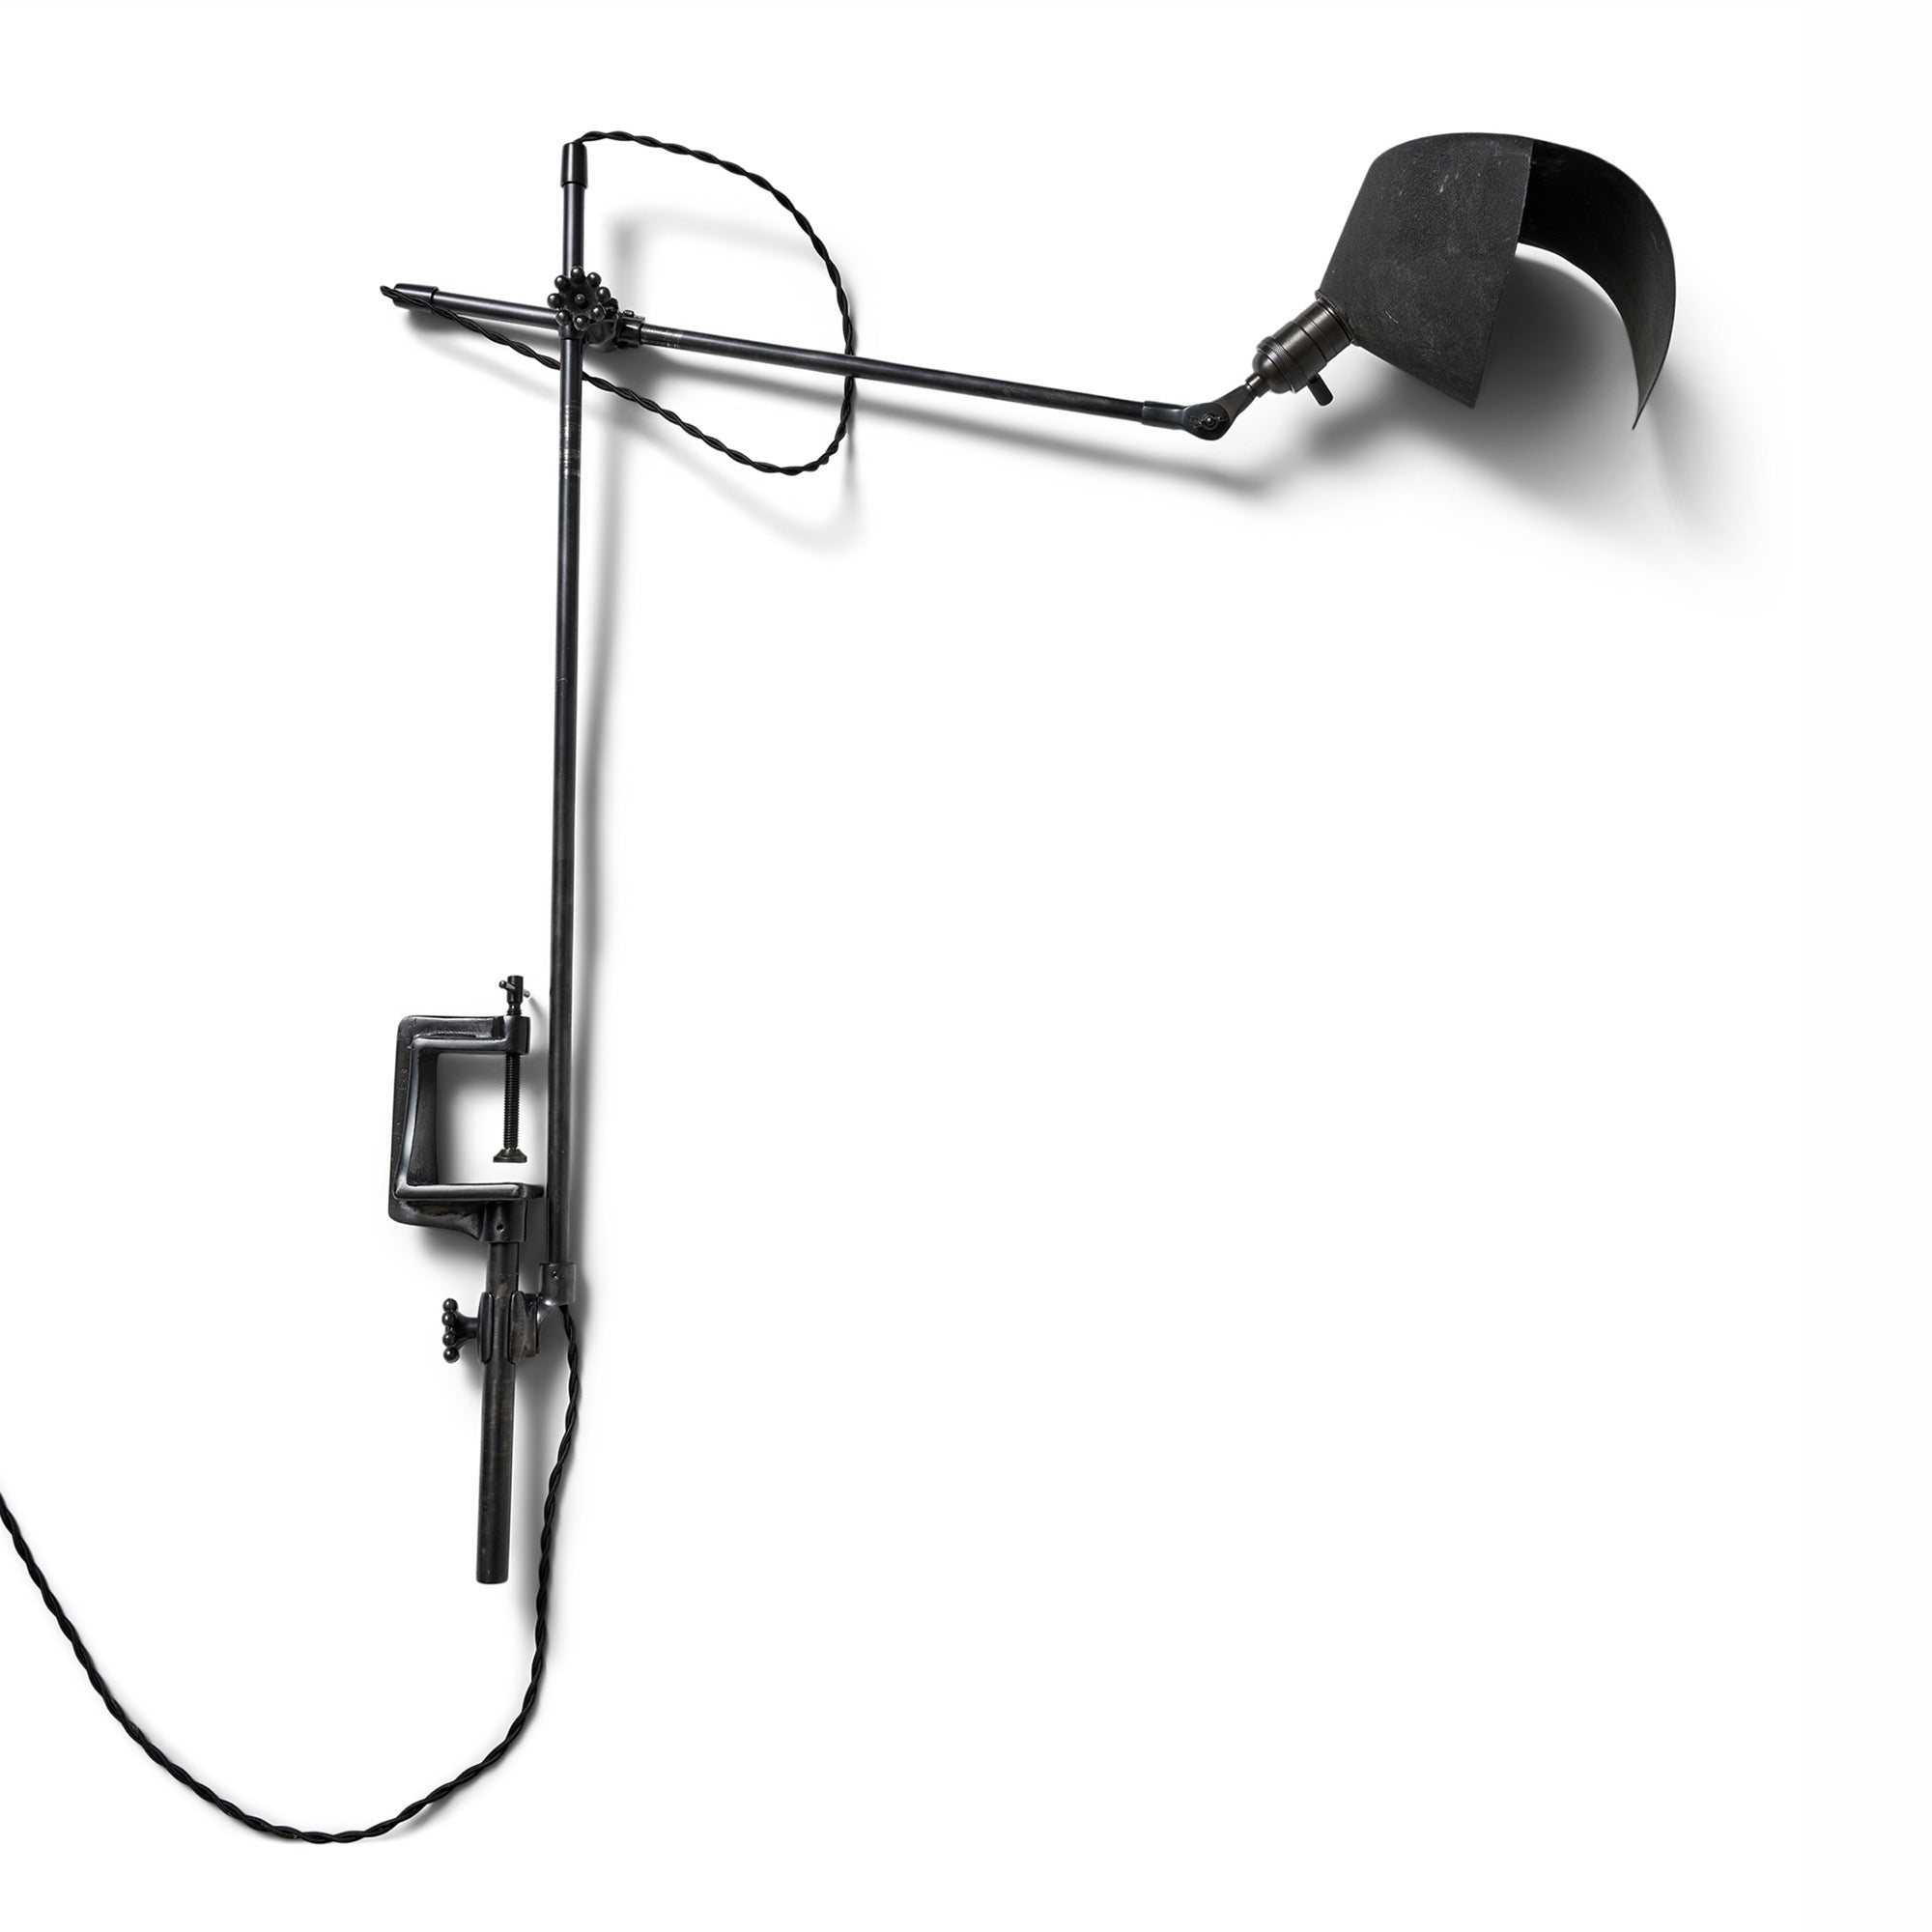 Articulating & Adjustable Light by O.C. White for O.C. White Co.